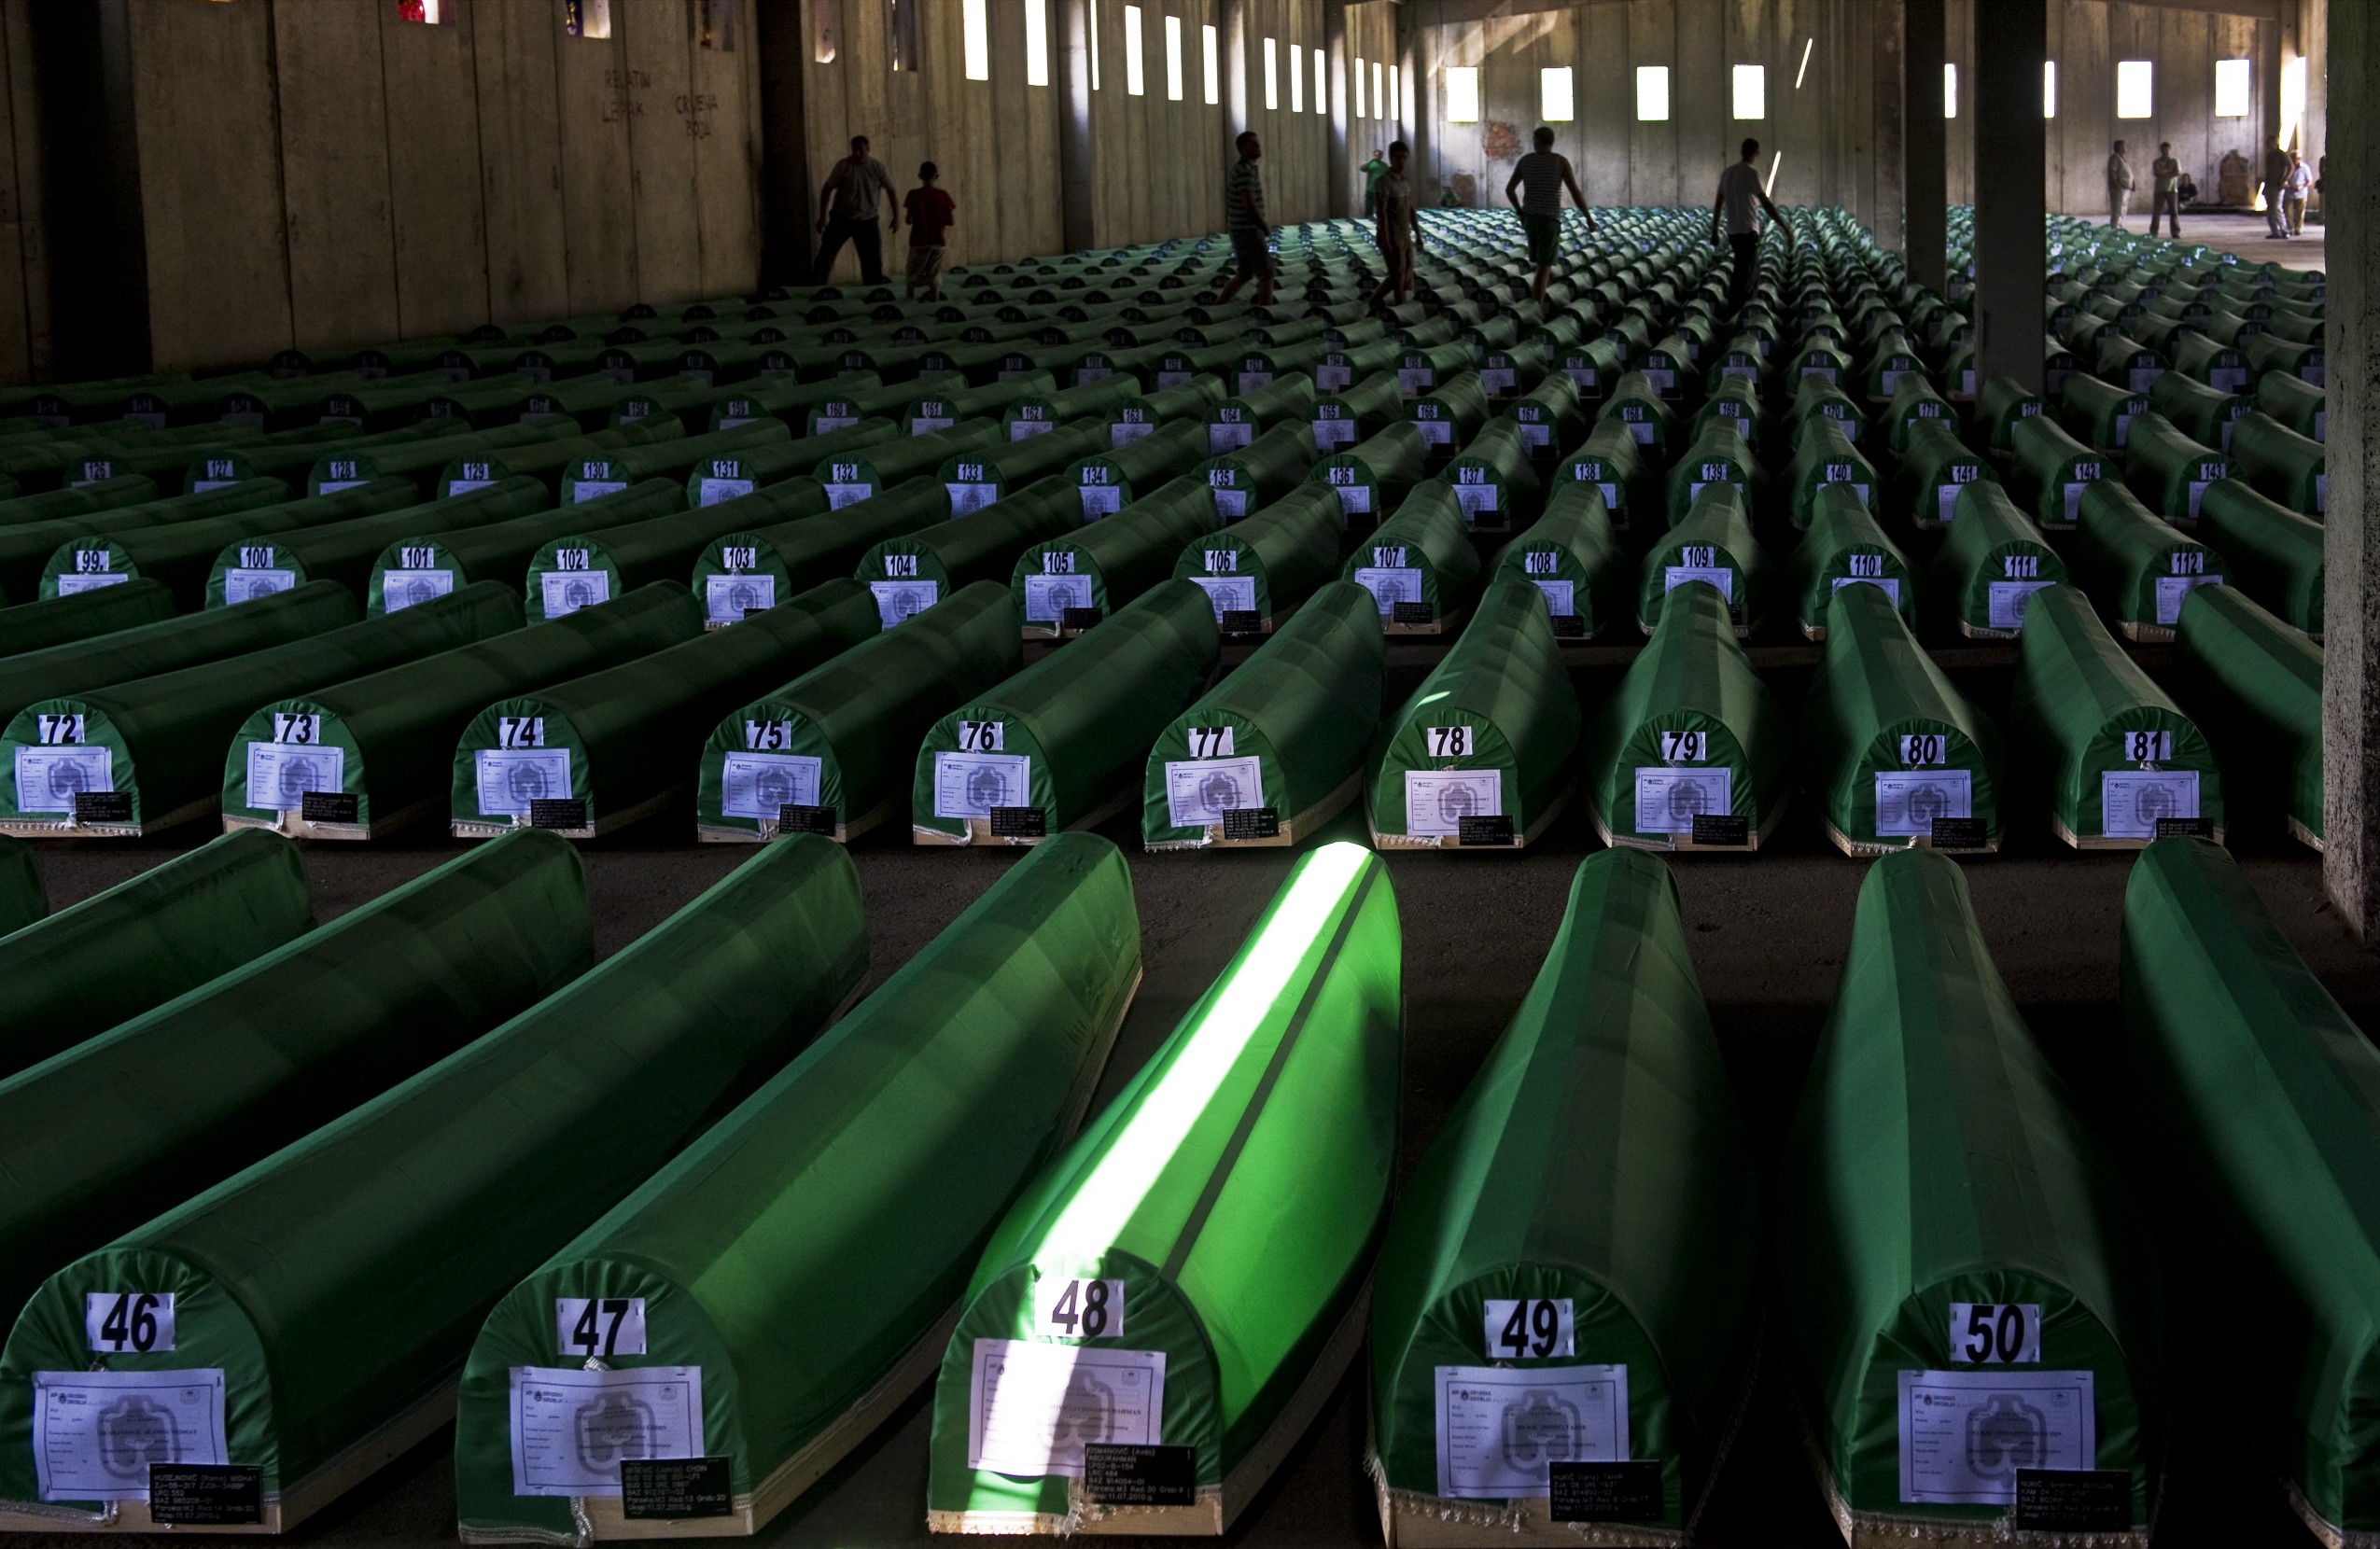 Srebrenica genocide was the genocidal killing of more than 8000 Bosniaks, mainly men and boys around the town of Srebrenica during the Bosnian War. The killing was perpetrated by units of the Army of Republika Srpska (VRS) under the command of General Ratko Mladic. In April 1993, the United Nations declared the besieged enclave of Srebrenica a "safe area" under UN protection. However, in July 1995, the United Nations Protection Force (UNPROFOR) contingent of Dutch peacekeepers did not prevent th --- Image by © Arne Hodalic/Corbis